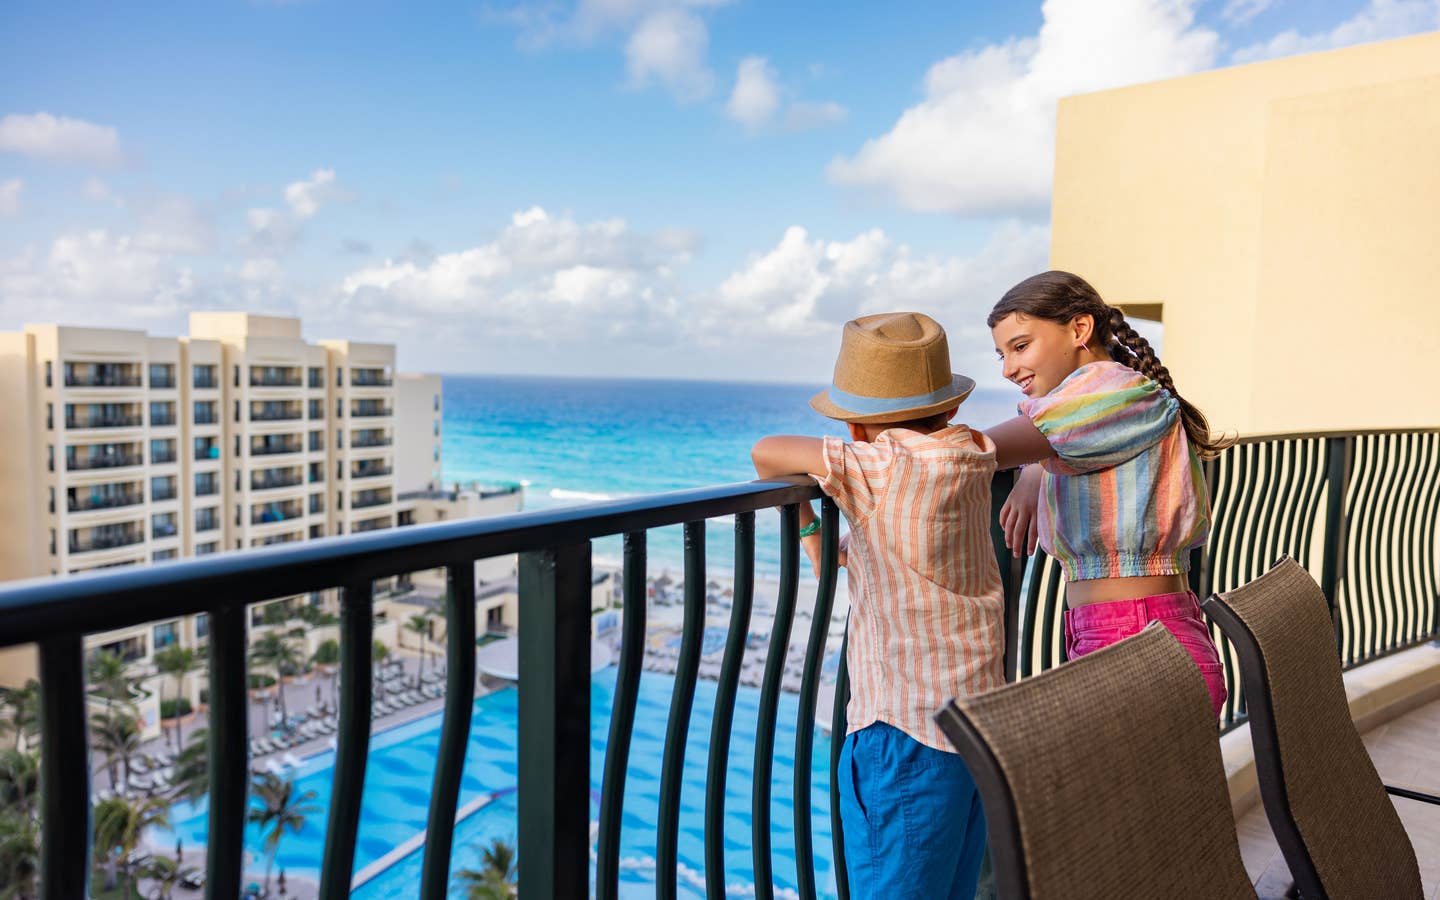 Kids on a balcony overlooking the pool and ocean at Royal Sands Resort.